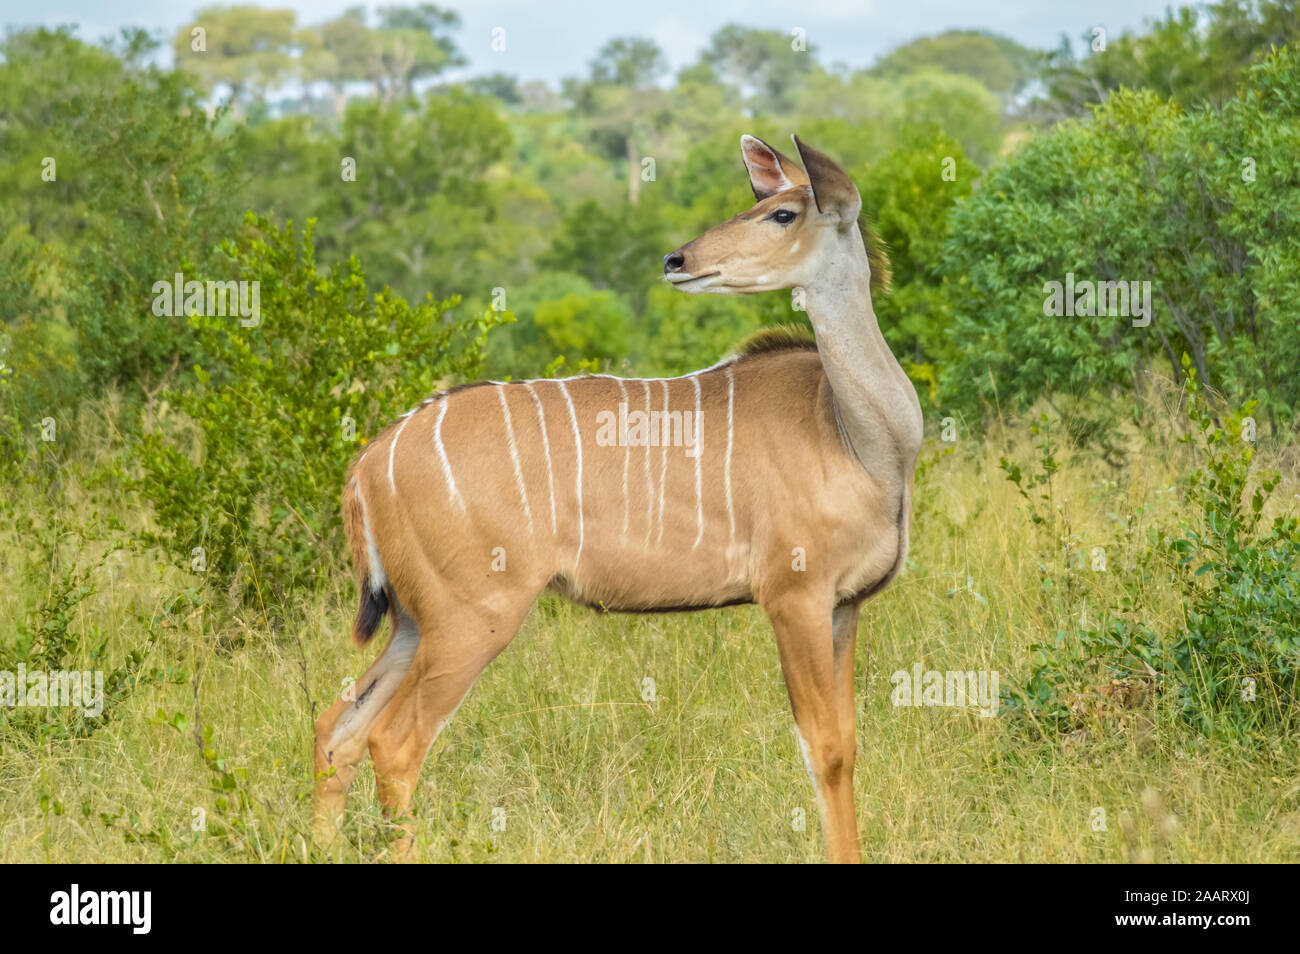 A big family of Kudu antelopes in Kruger national park South Africa Stock Photo